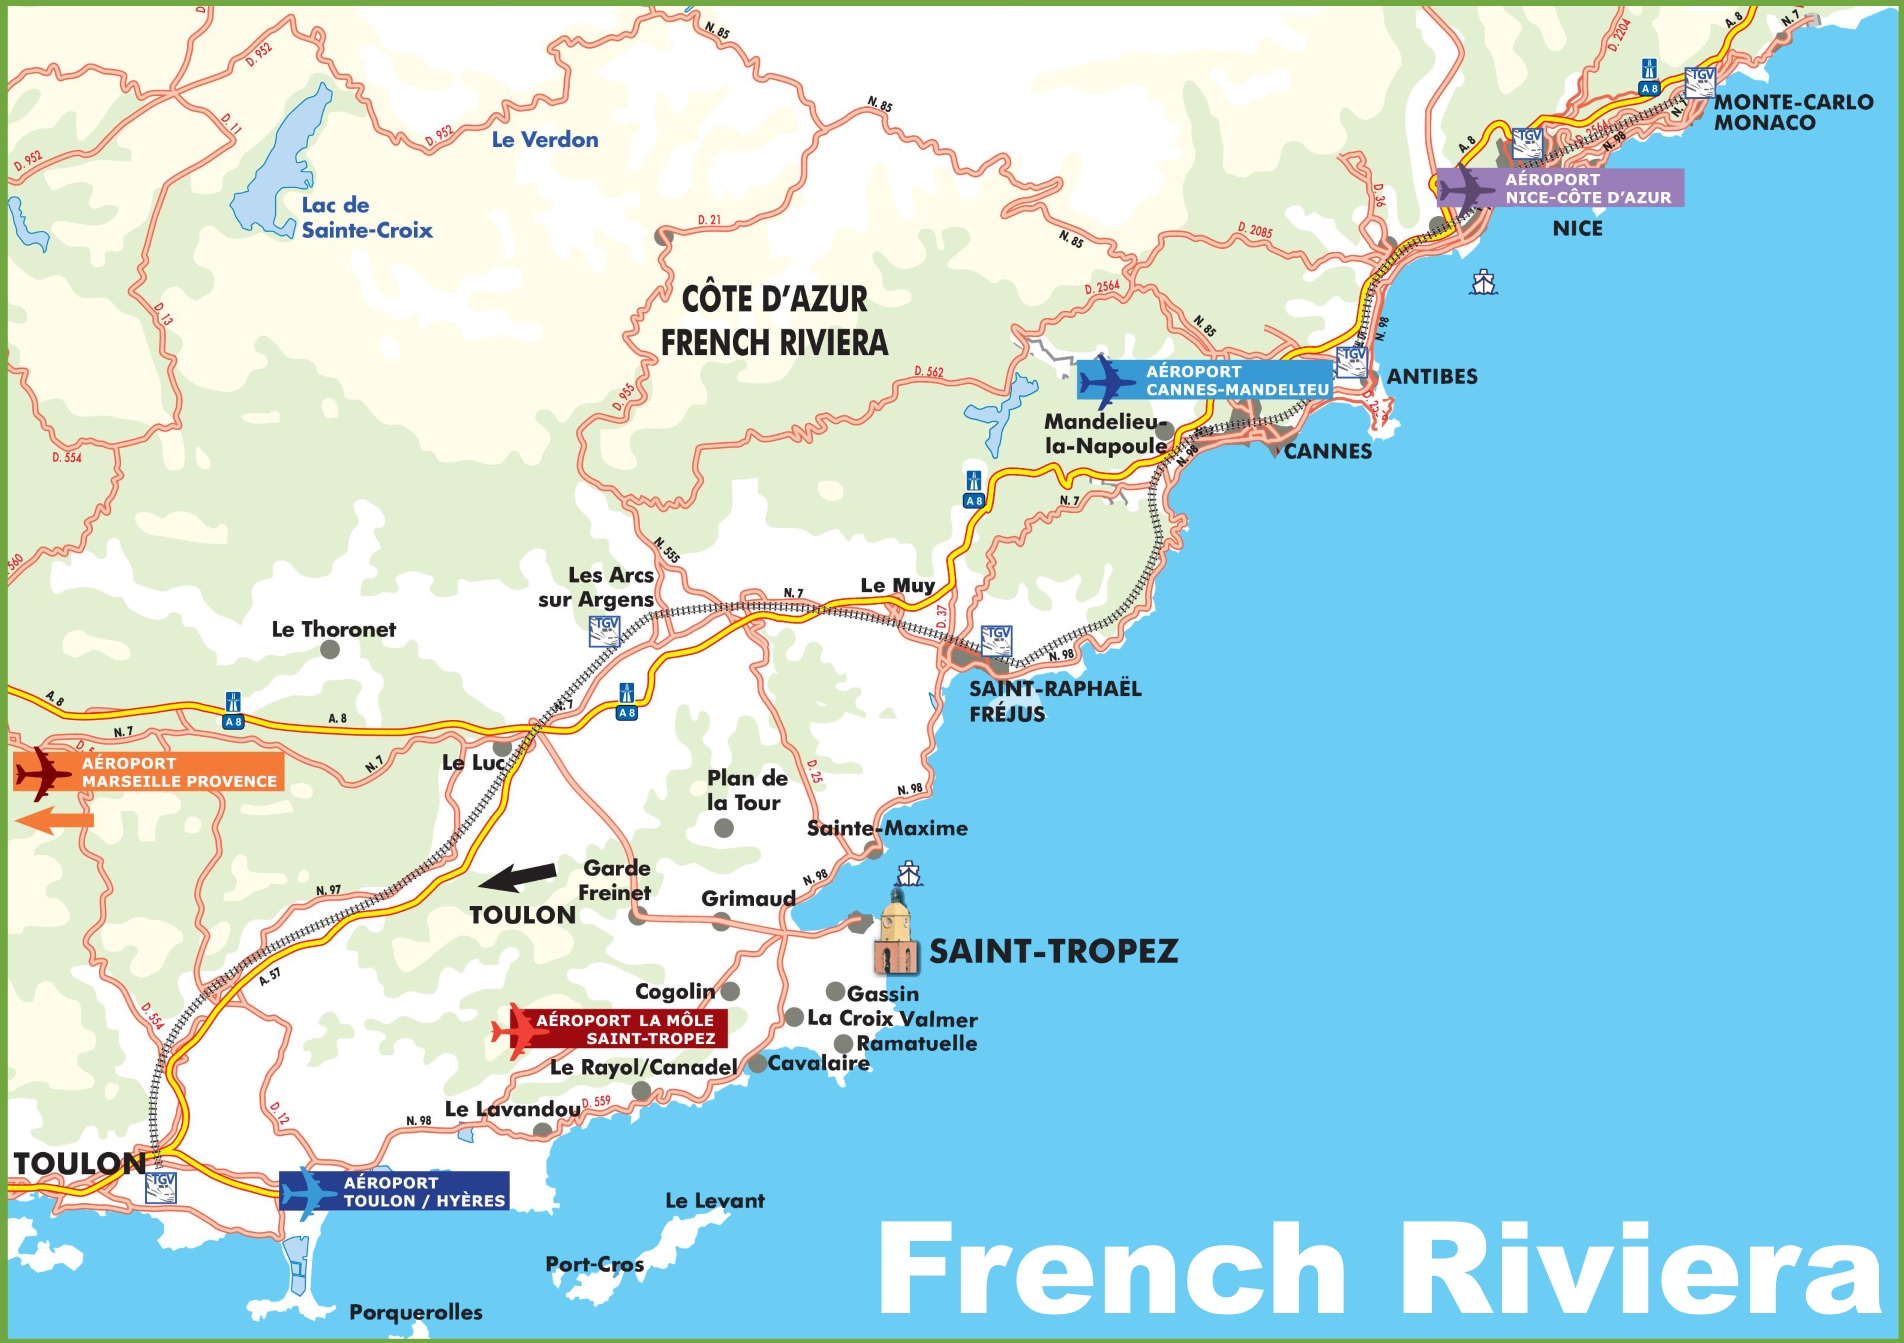 map-of-french-riviera-with-cities-and-towns.jpg